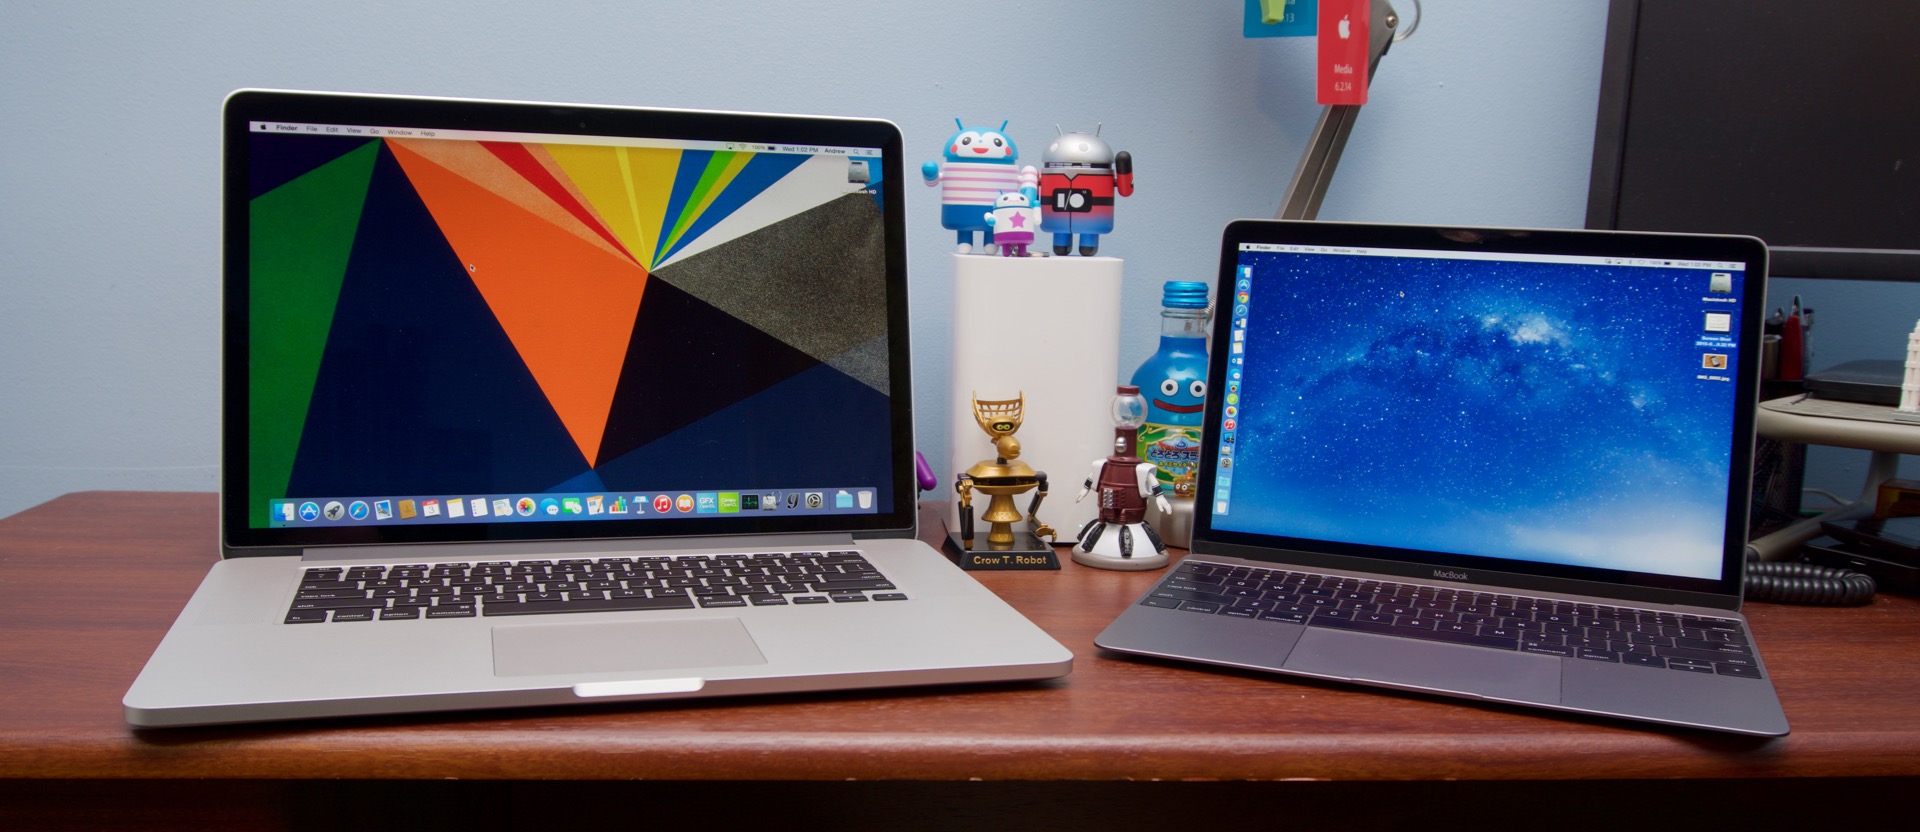 New model, two-year-old processor: The 2015 15-inch Retina MacBook